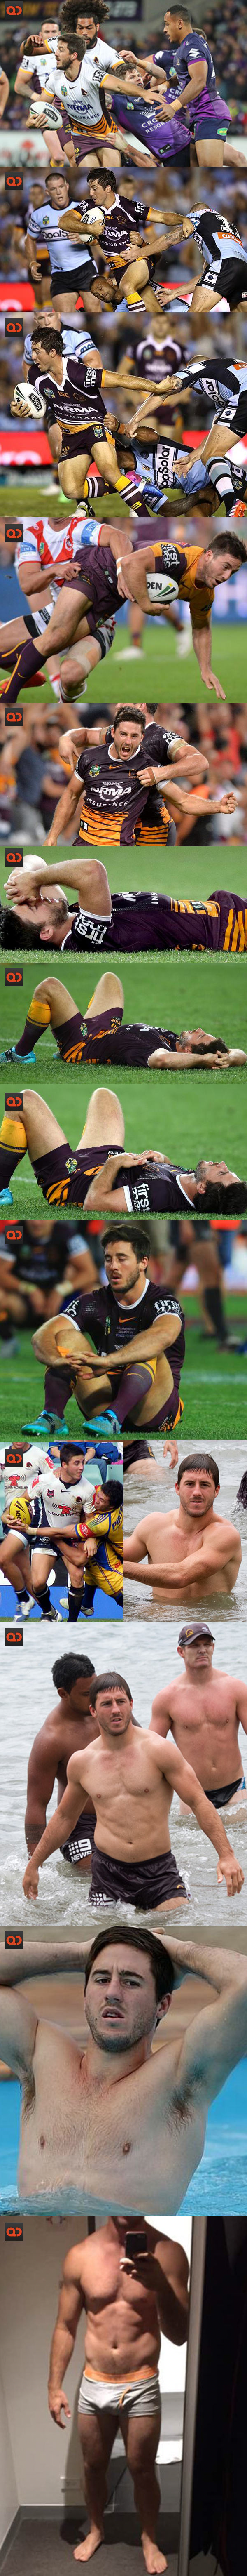 Ben Hunt, Aussie Pro Rugby League Footballer, Completely Naked In Leaked Photos!